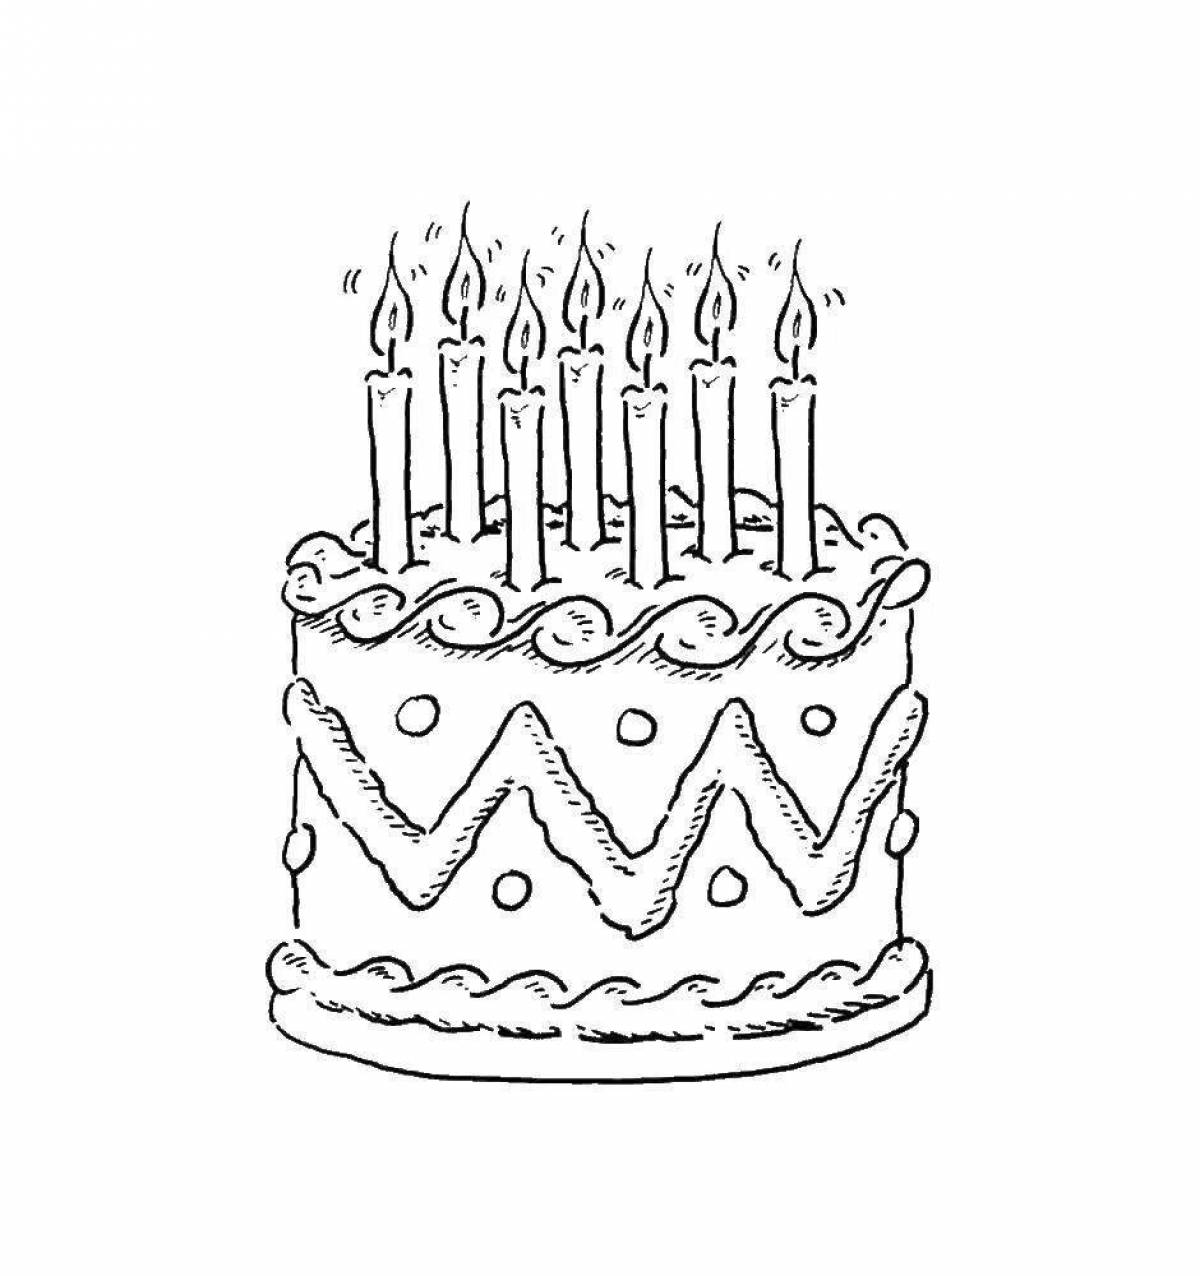 Coloring page decorative birthday cake